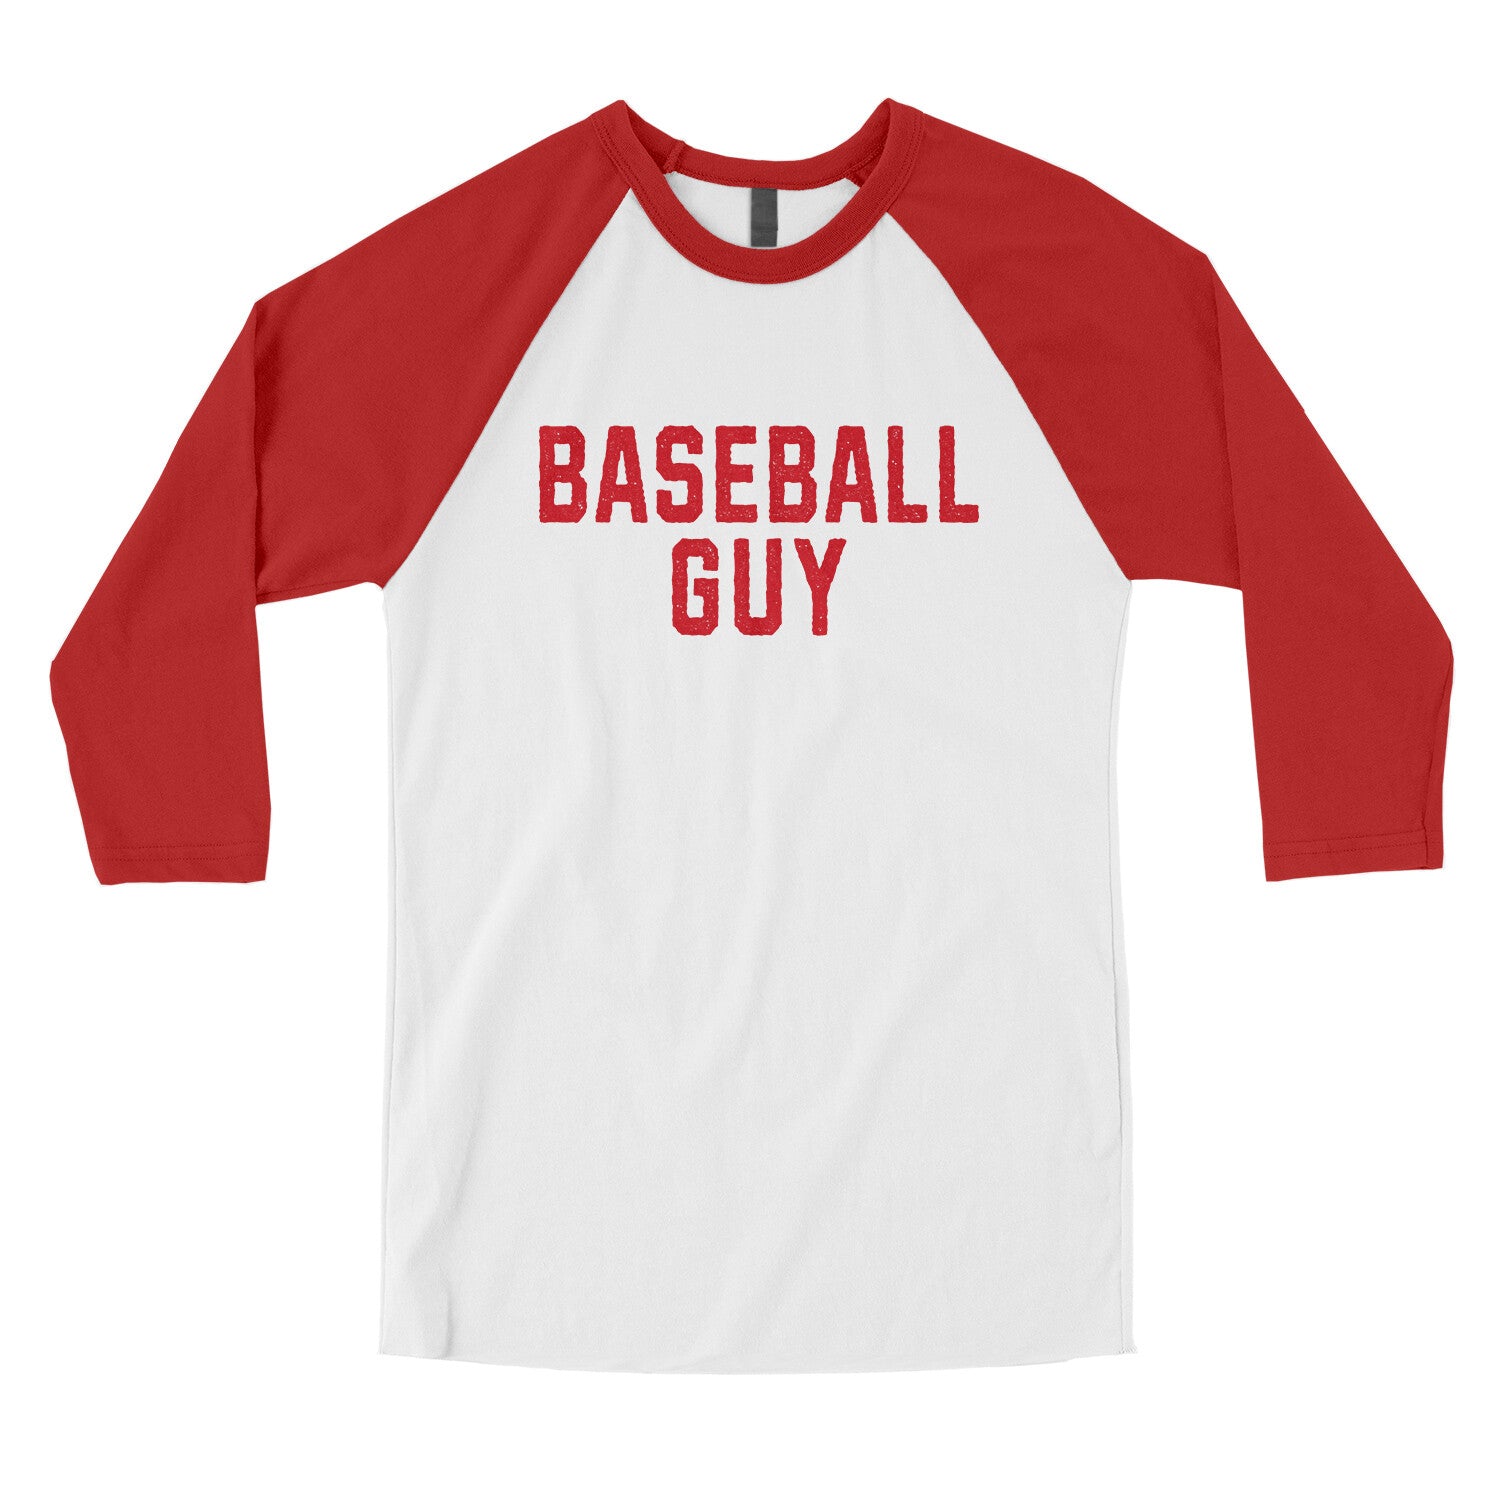 Baseball Guy in White with Red Color